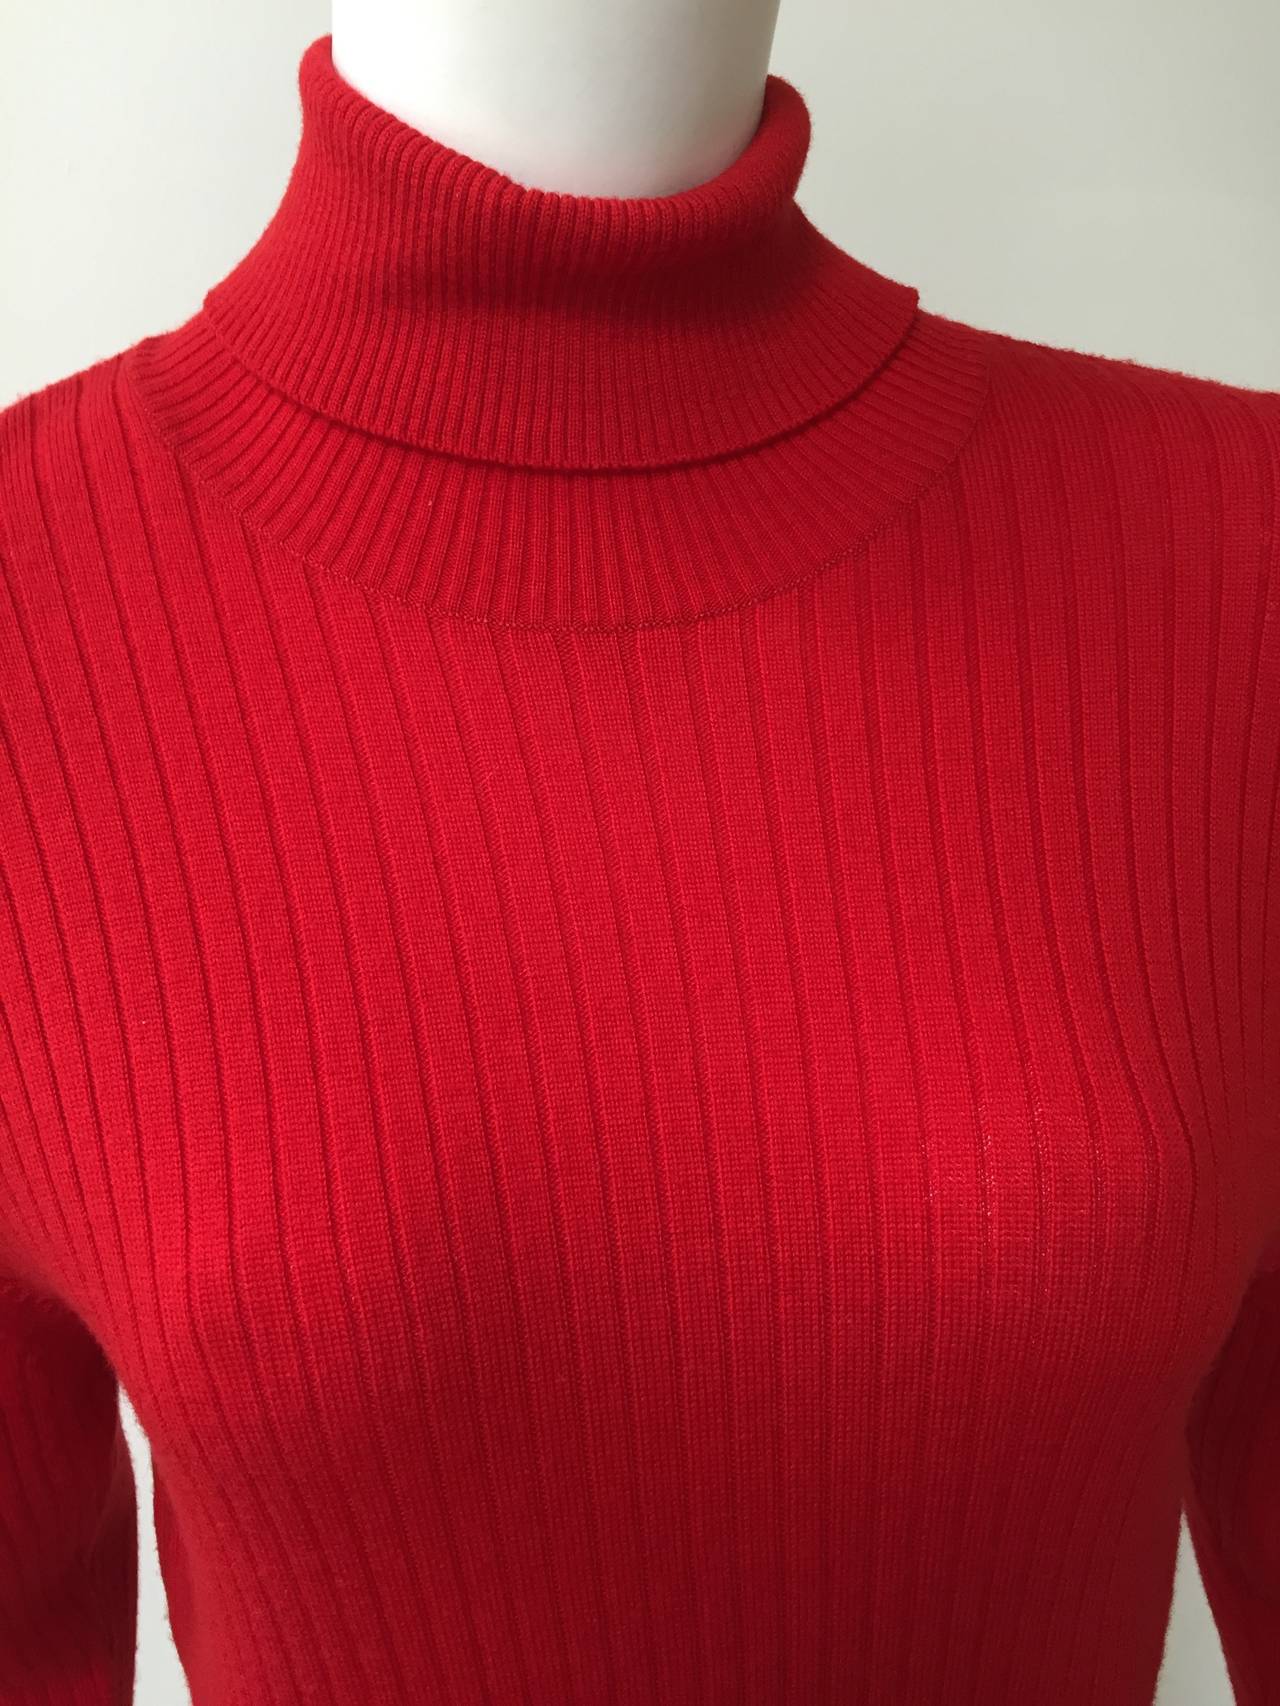 Chanel 80s red wool knit sweater size 38 fits modern day size 6 ( please see measurements). There are 3 Chanel gold logo buttons on each cuff and 4 Chanel gold logo buttons at back of neck. Ribbed band at bottom. Depending on height this top can